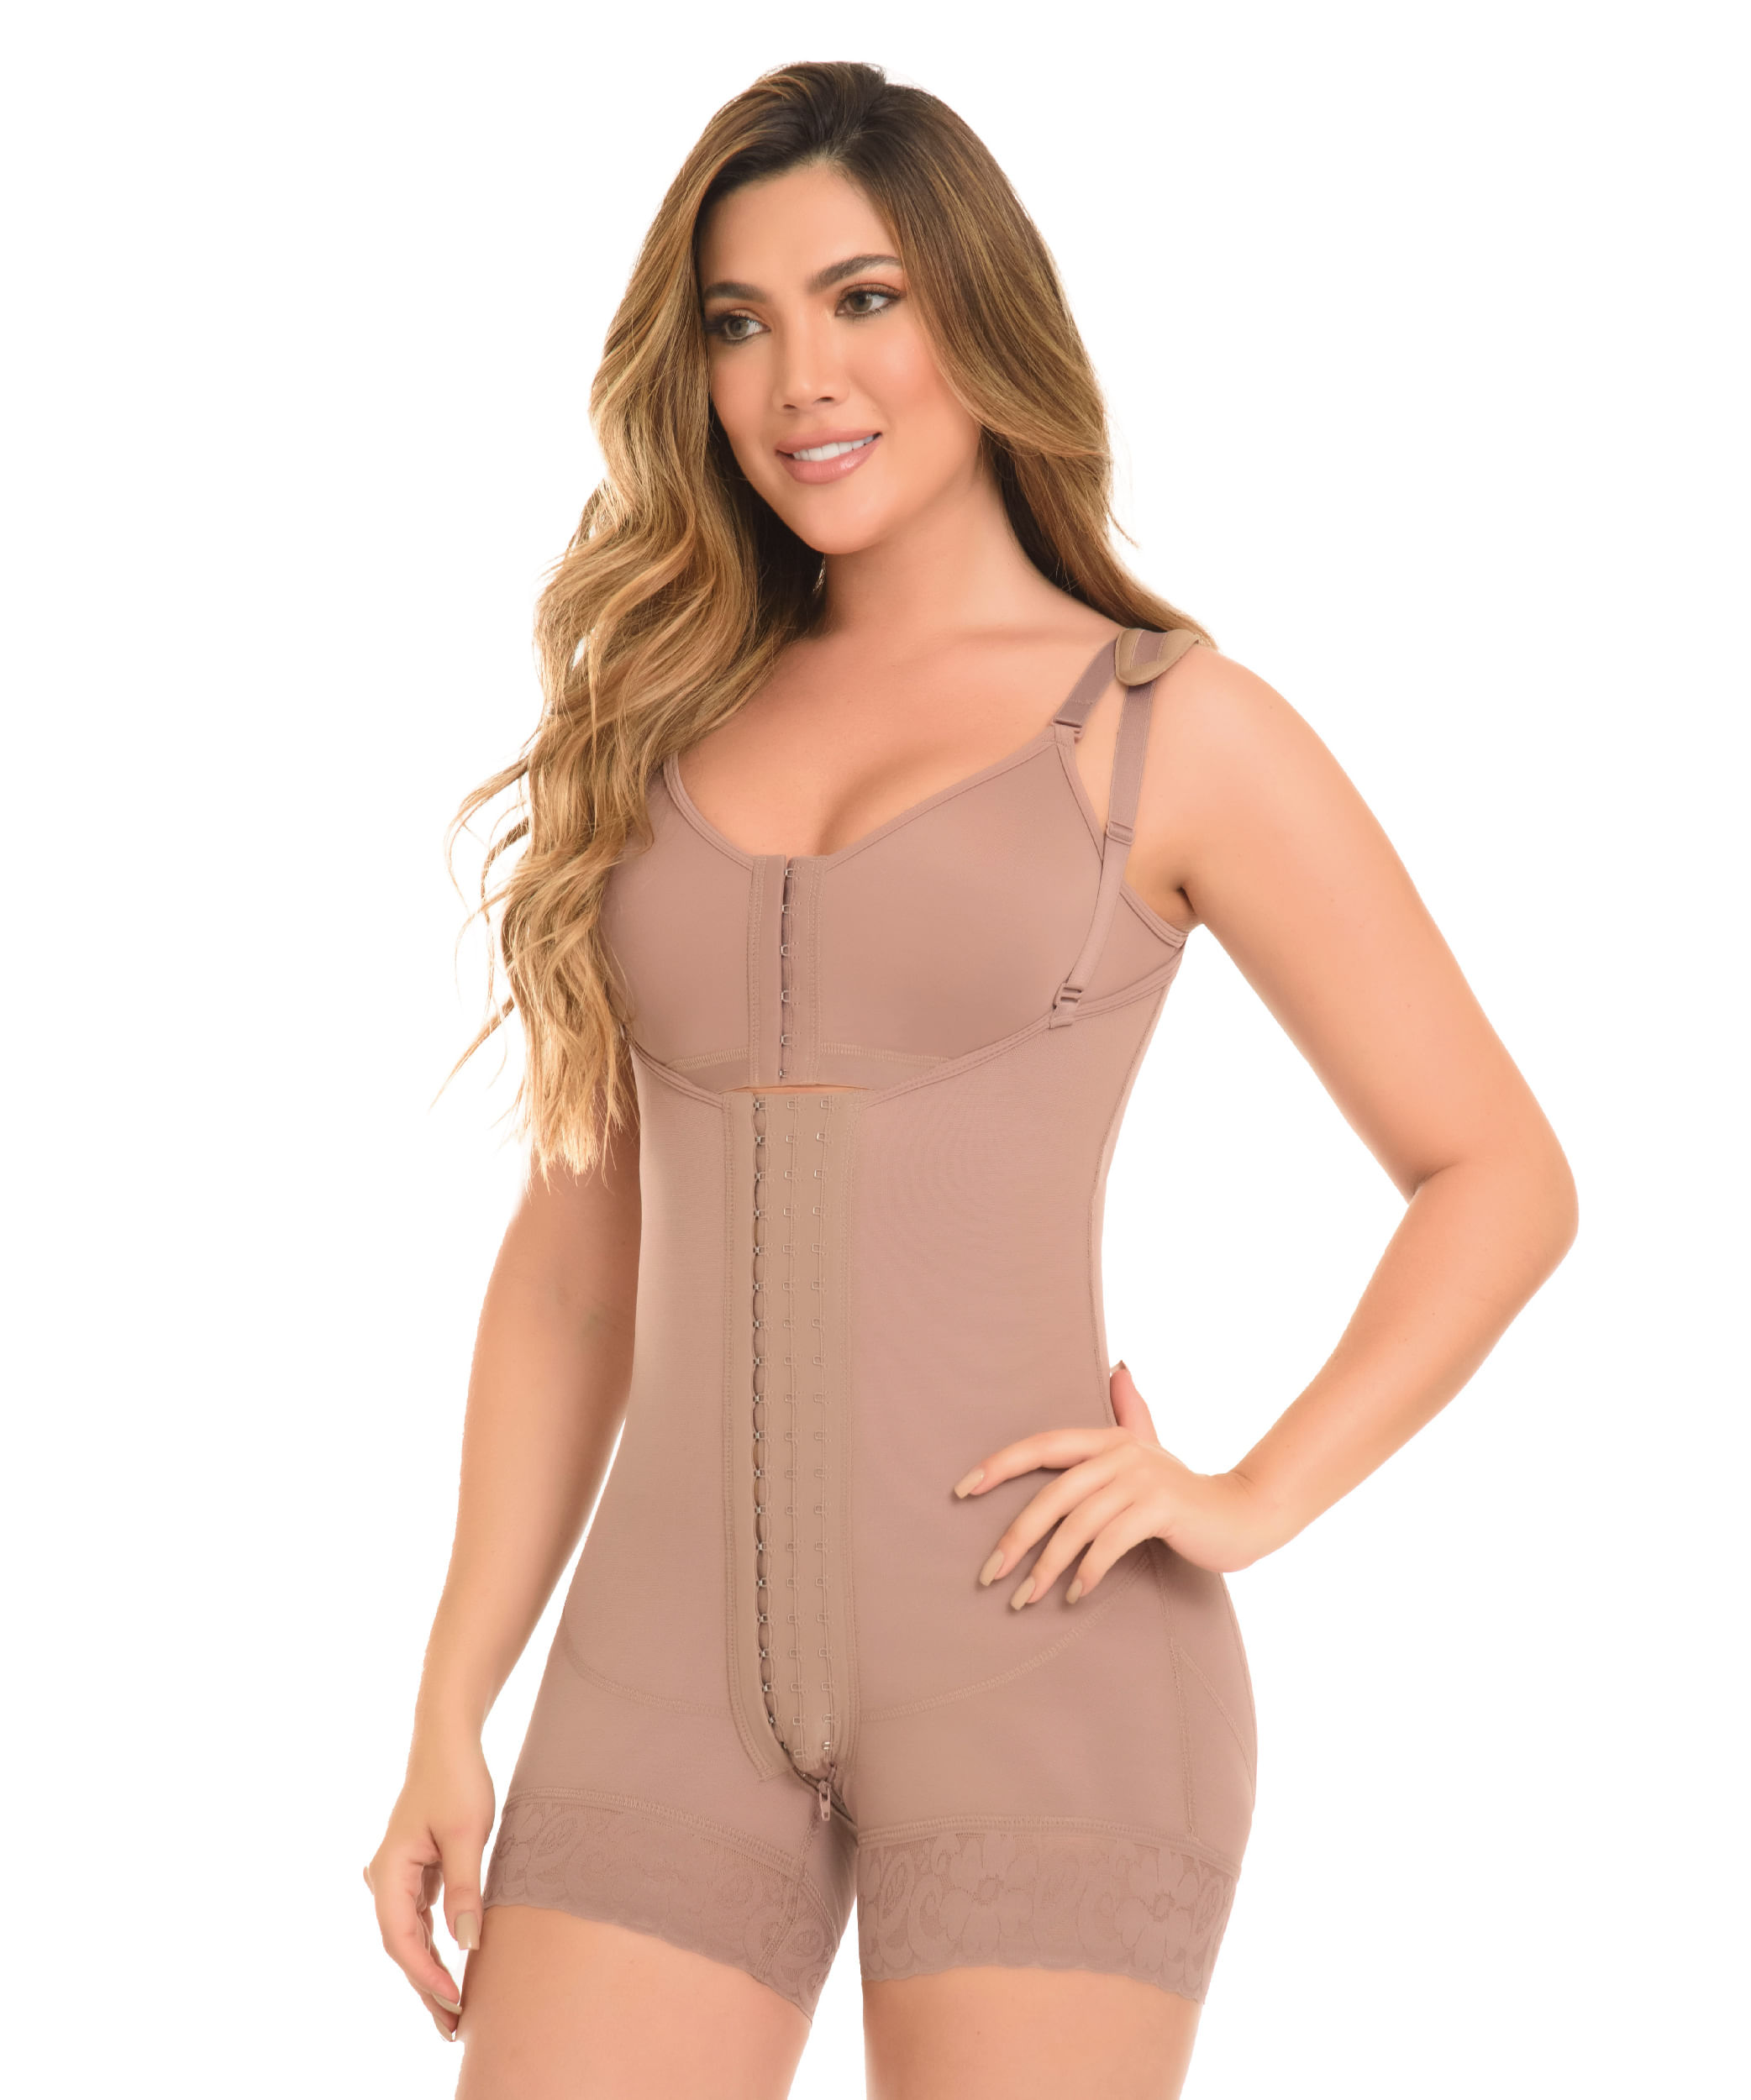 Mid-chic 360 Fit girdle with hooks and perineal opening